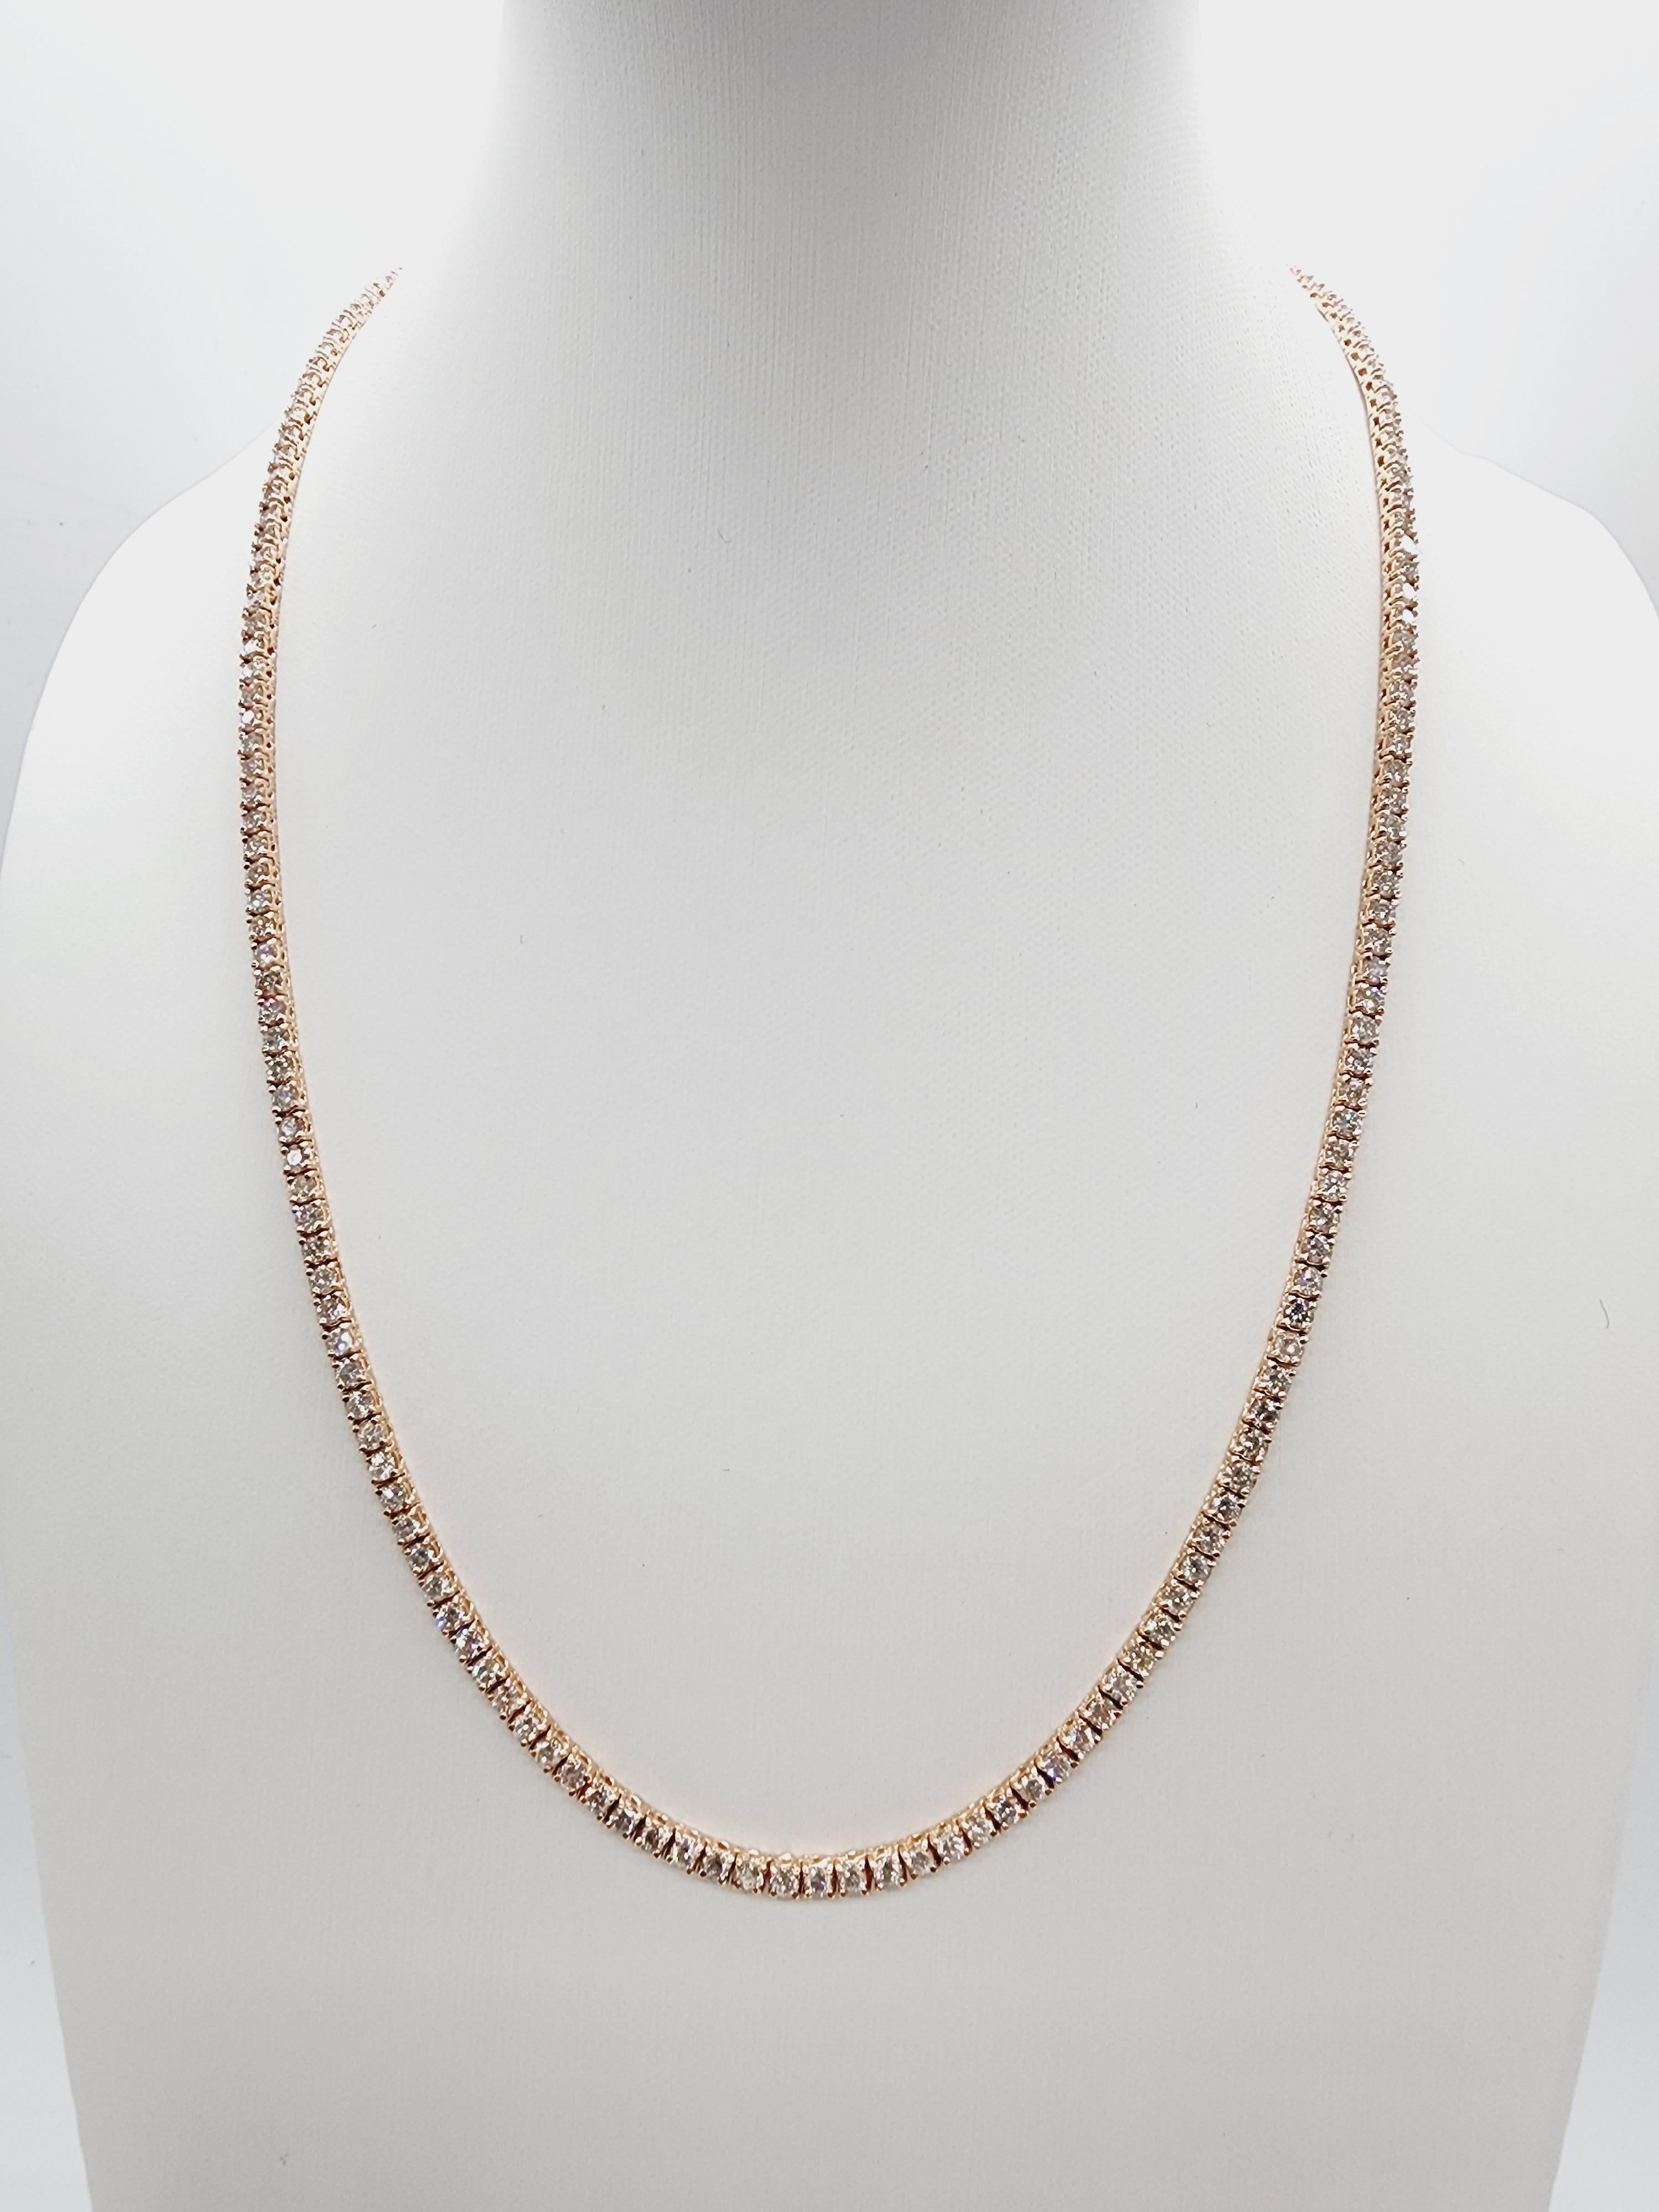 Brilliant and beautiful tennis necklace, natural round-brilliant cut white diamonds clean and Excellent shine. 14k rose gold classic four-prong style for maximum light brilliance. Elegance for every occasion.

16 inch length. 
Average H Color, SI